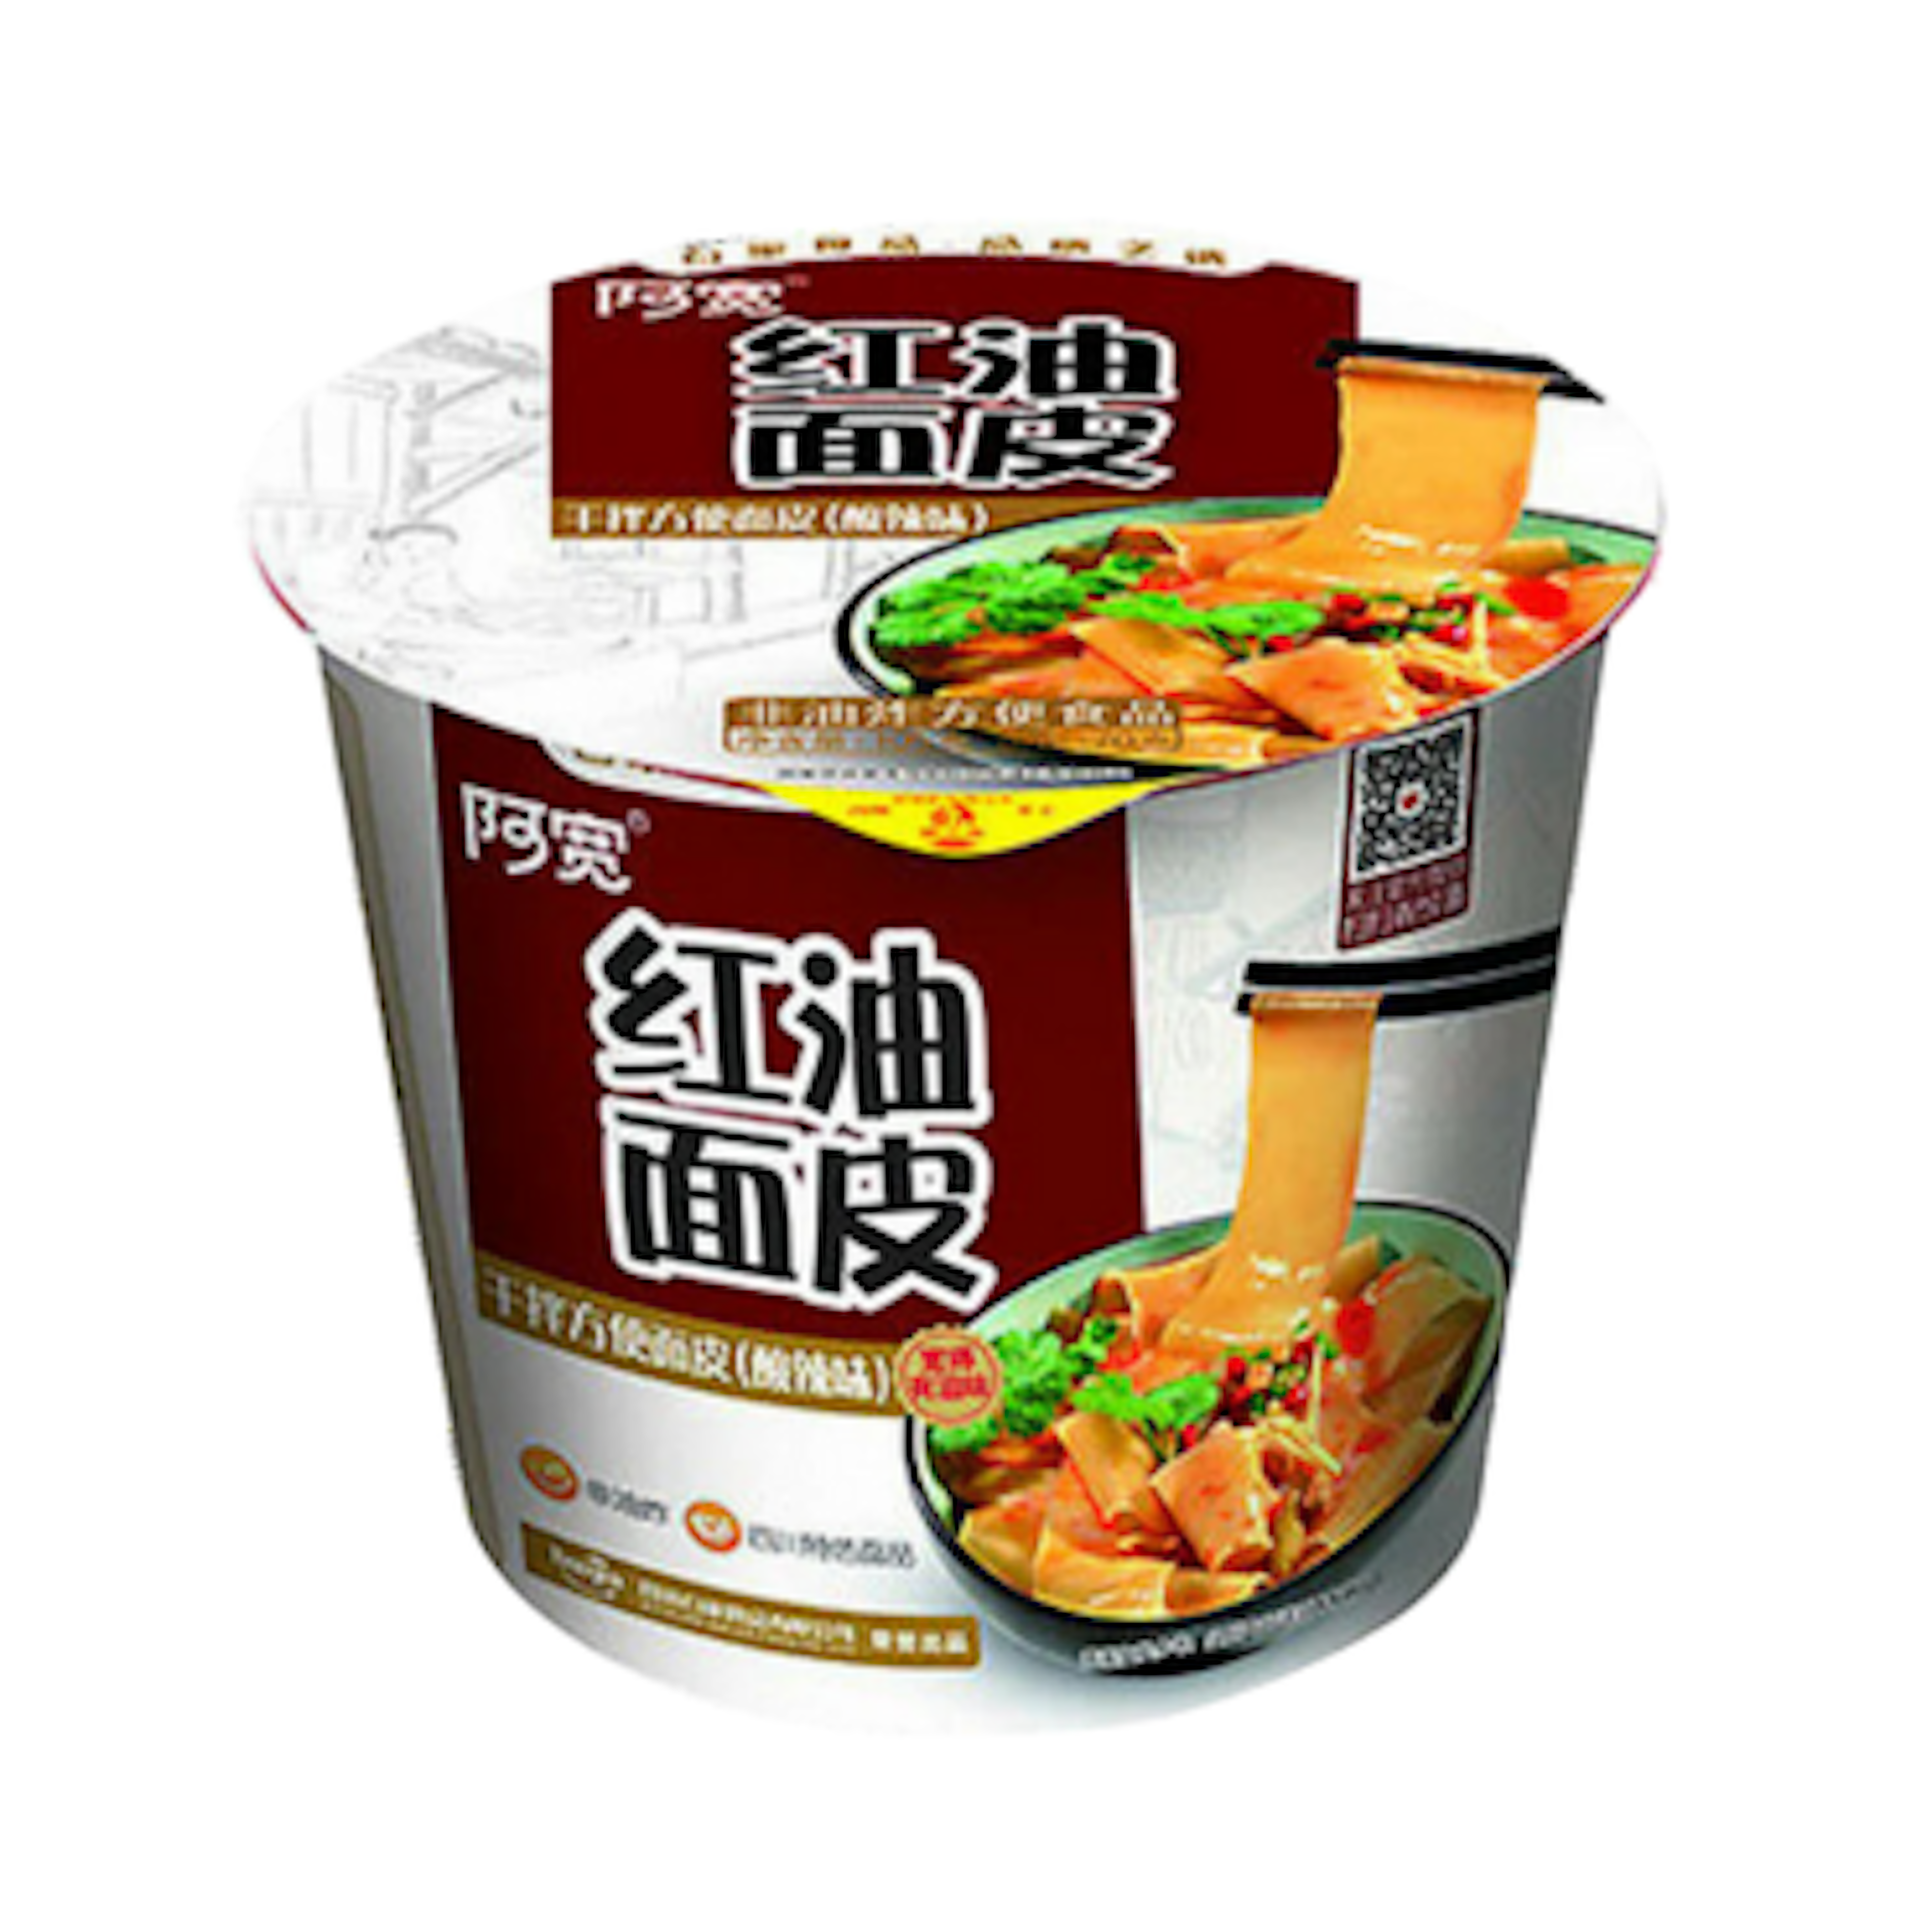 Baijia A-Kuan Broad Noodle Chili Oil Flavor - Spicy and Sour Broad Noodles, 115g